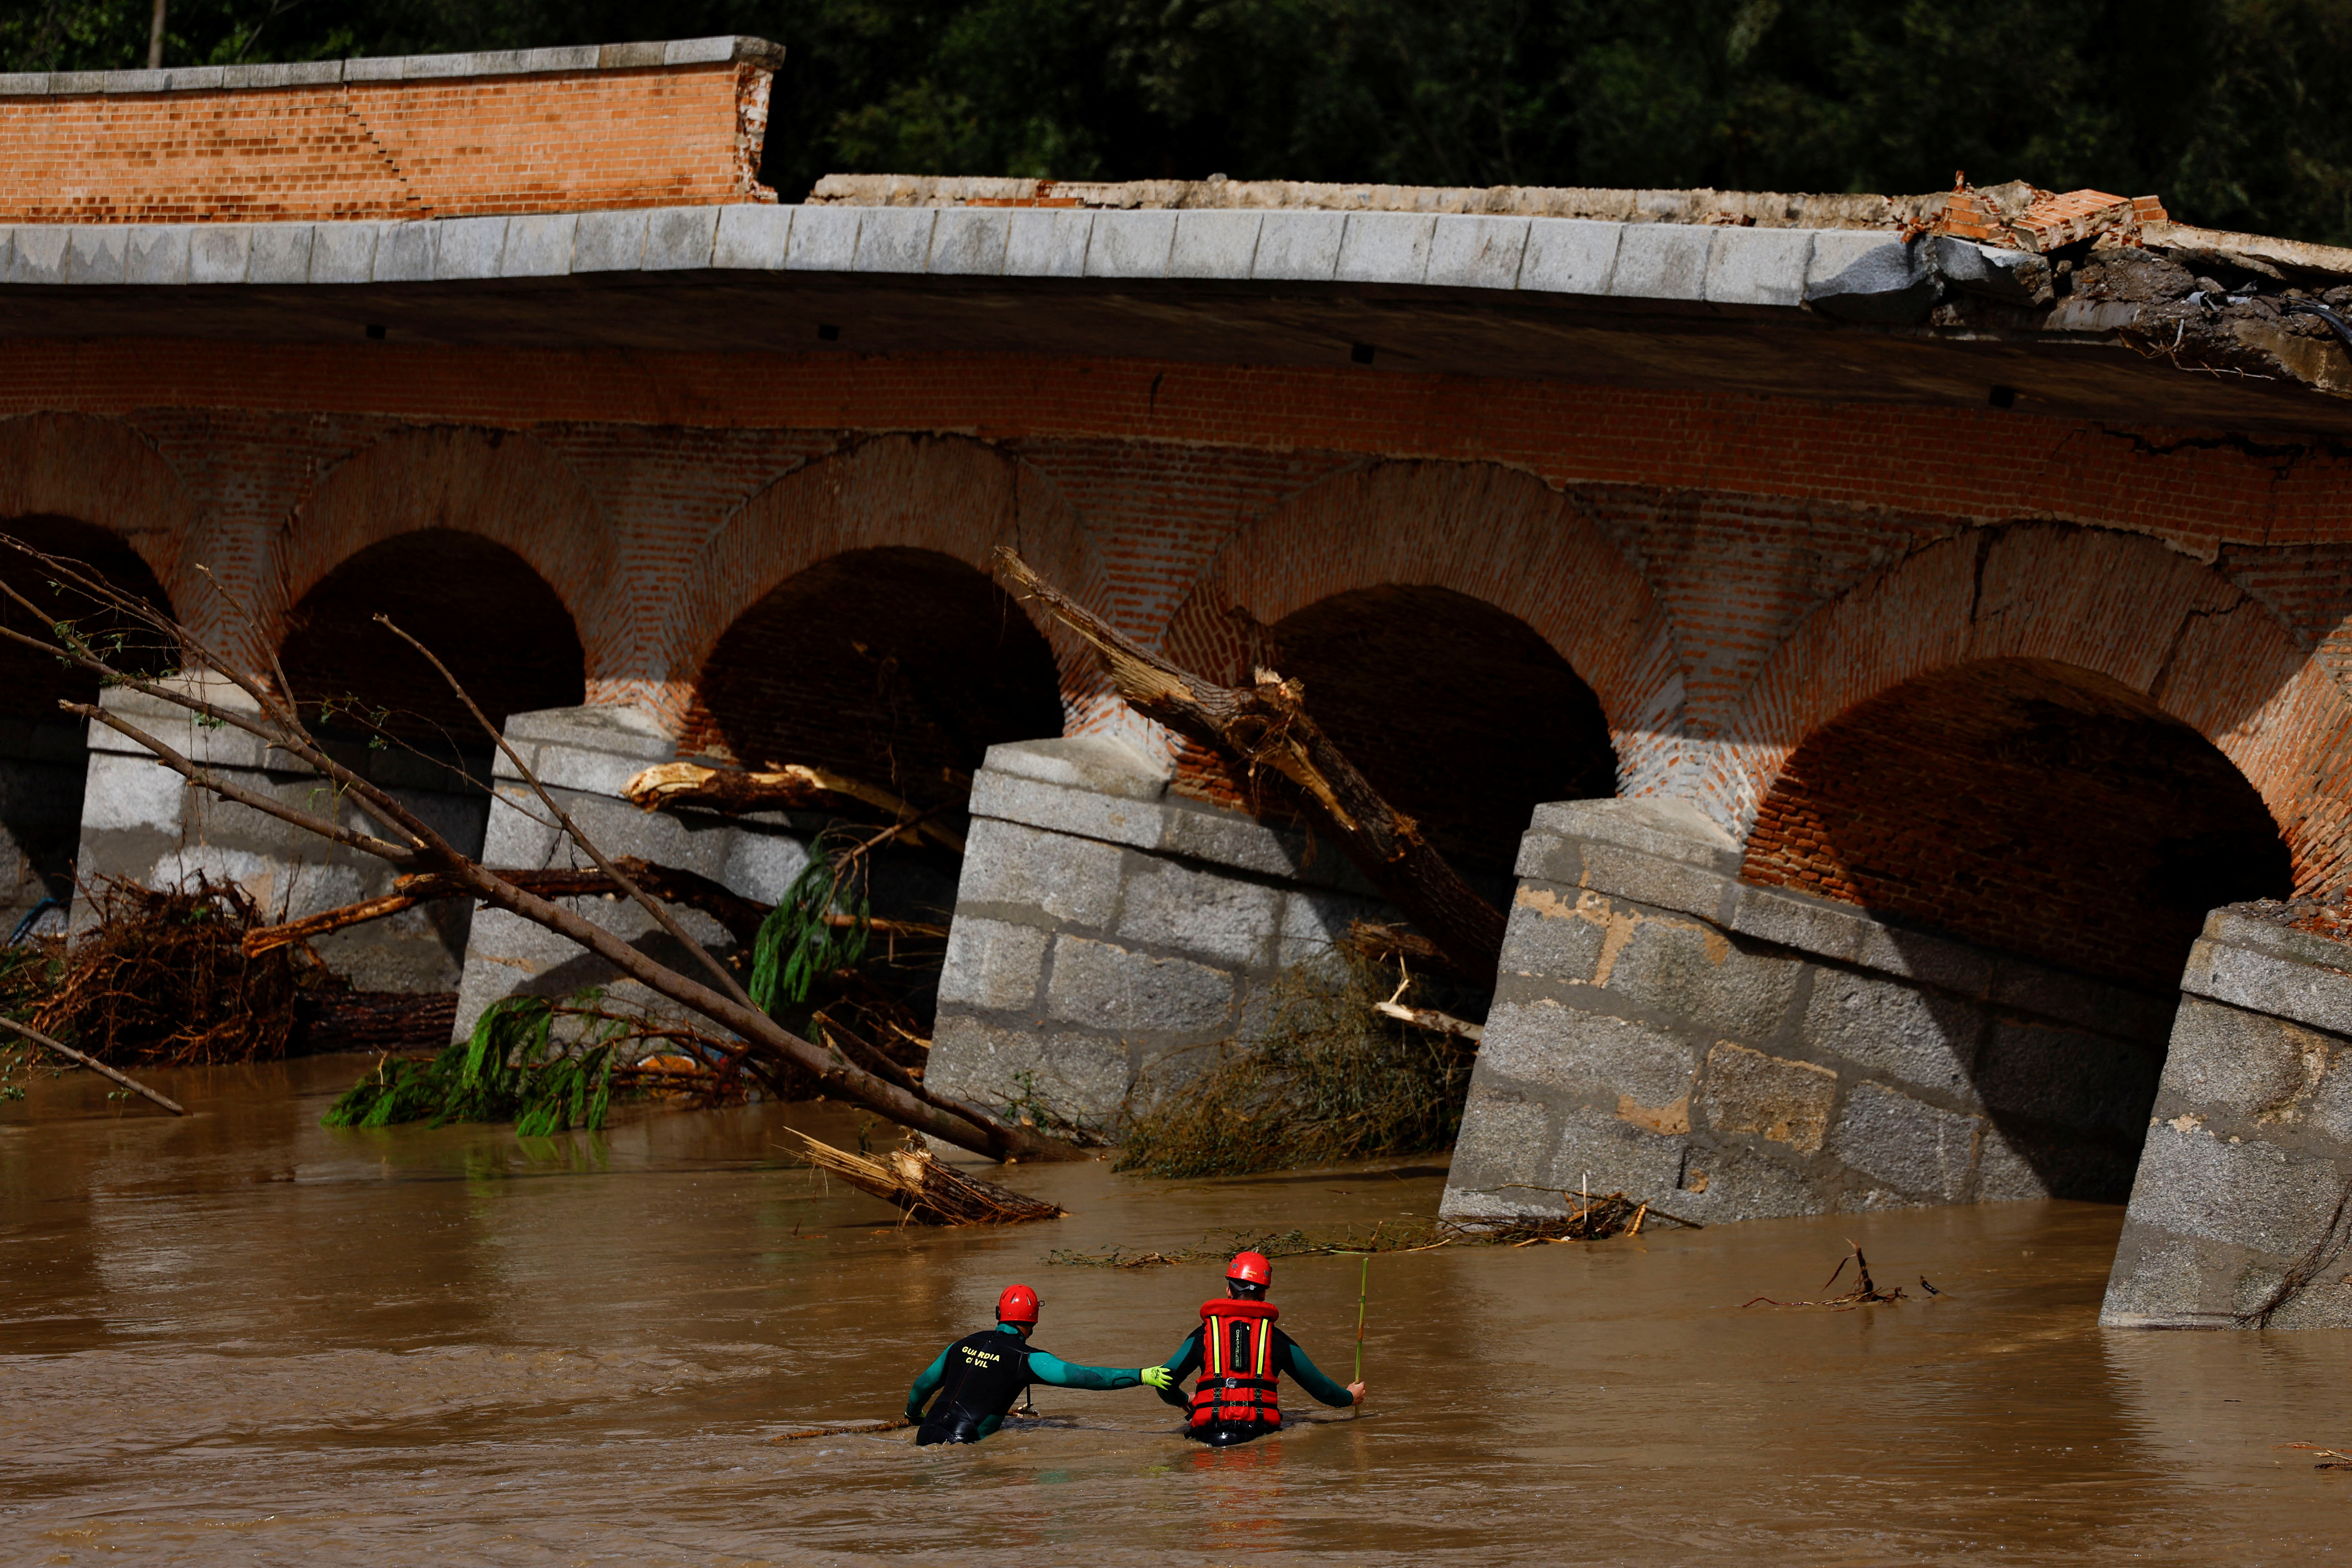 Aftermath of heavy rain in central Spain